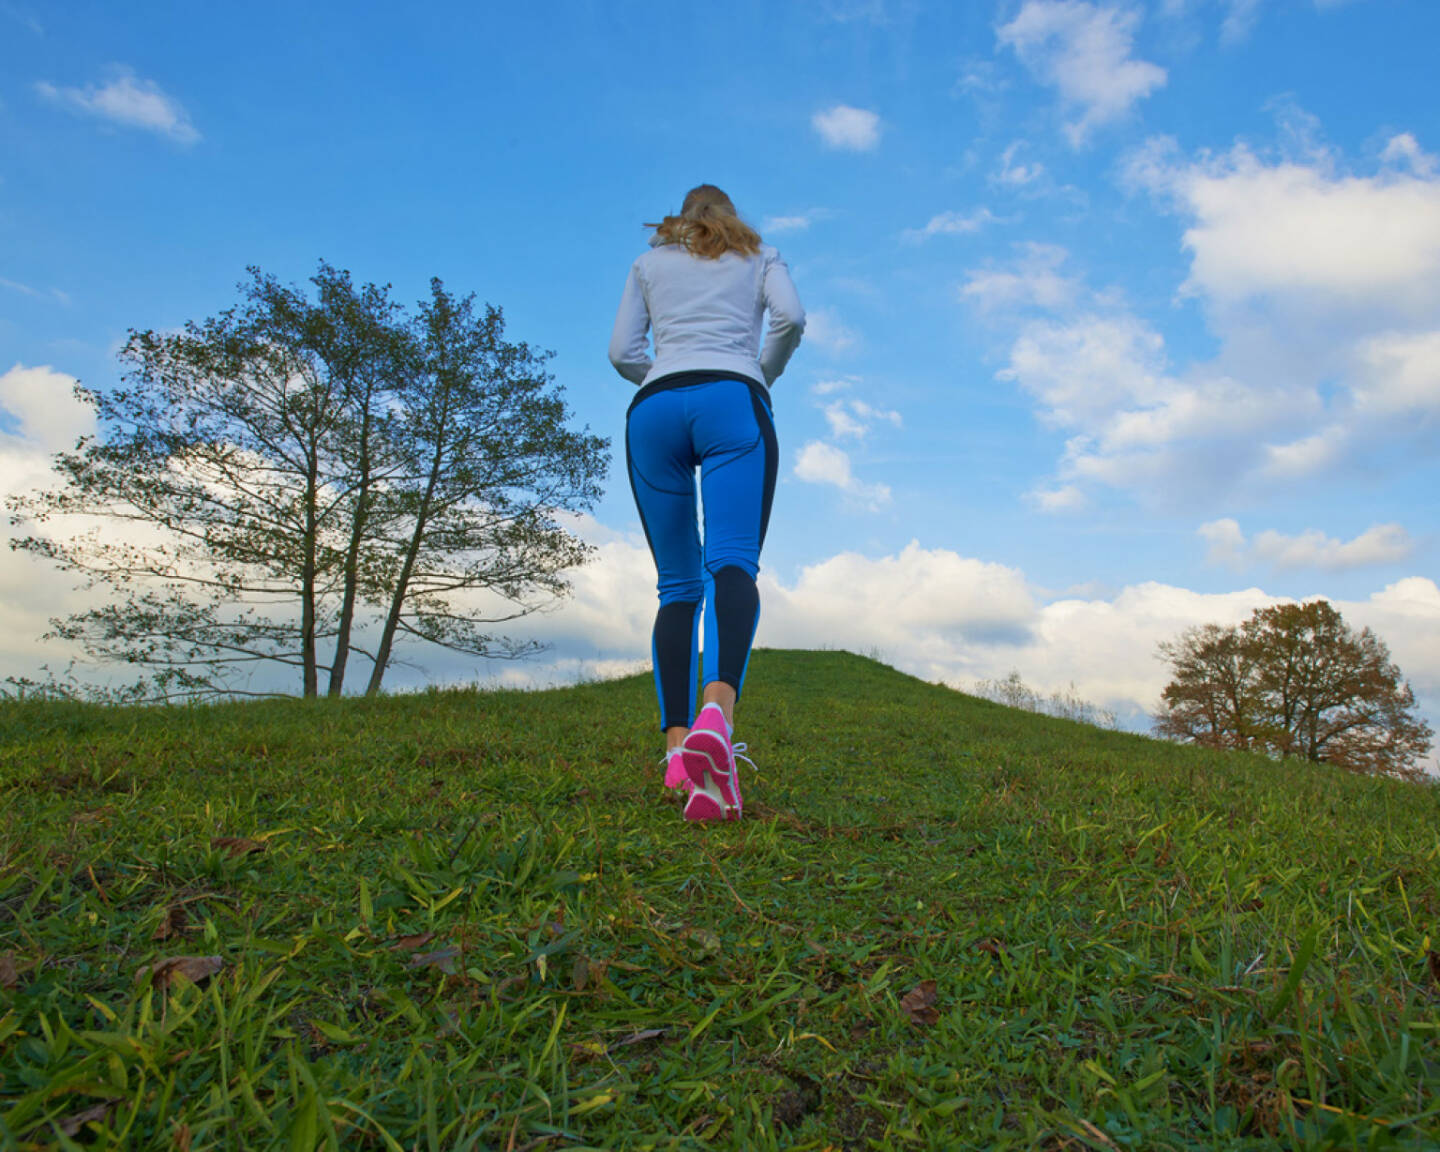 Laufen, Läuferin, Frau, bergauf, hinauf, aufwärts, top, on top, to the top, http://www.shutterstock.com/de/pic-163228358/stock-photo-pretty-female-going-up-the-hill-to-clouds-with-a-nice-background.html